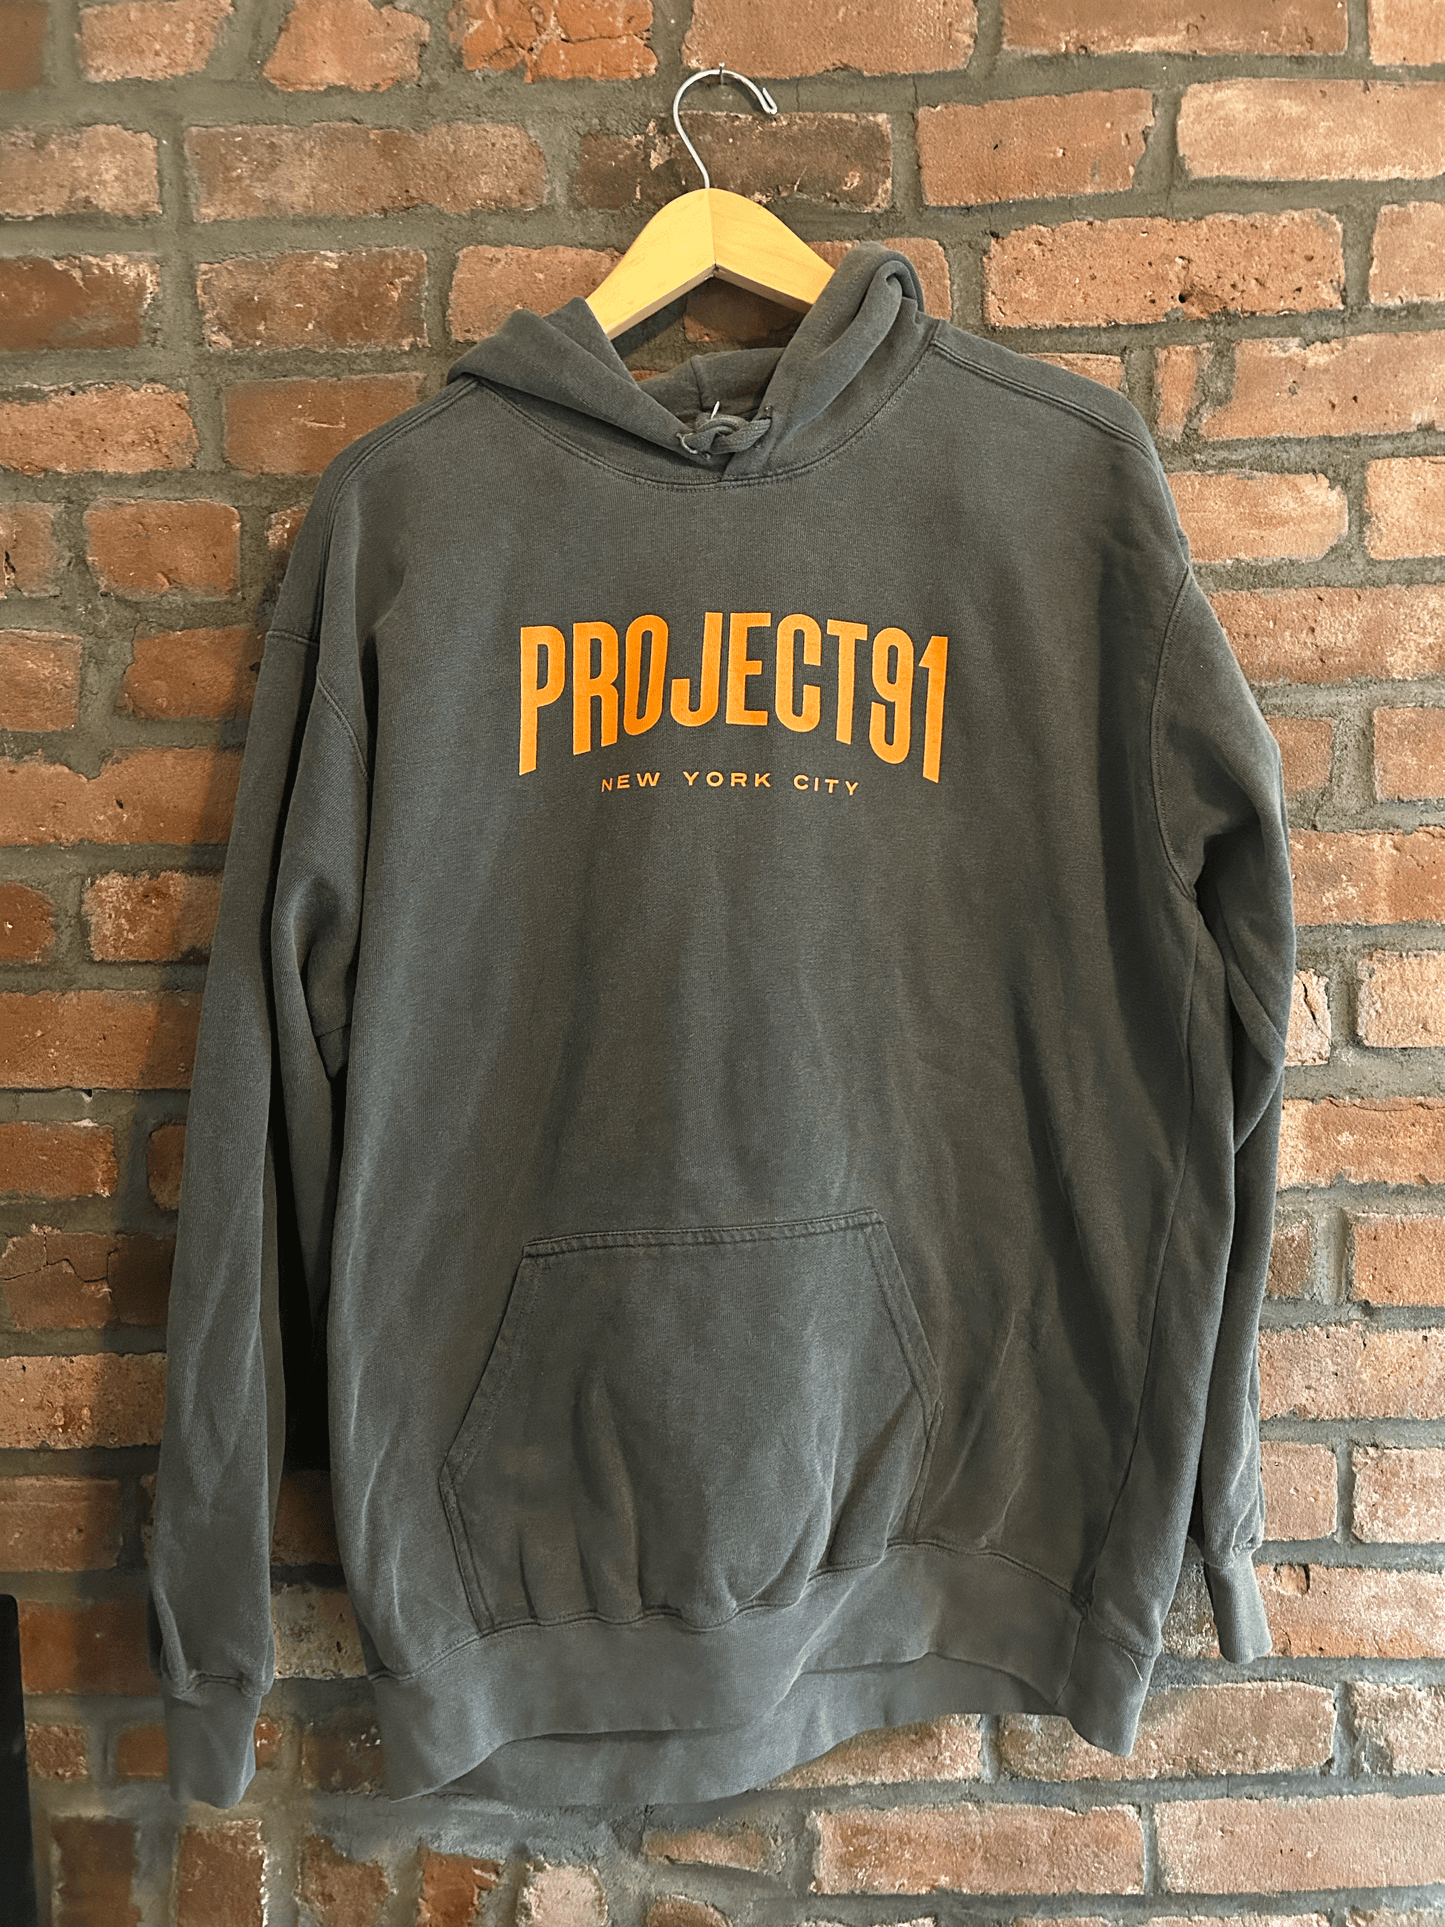 Project 91 Staff Hoodie